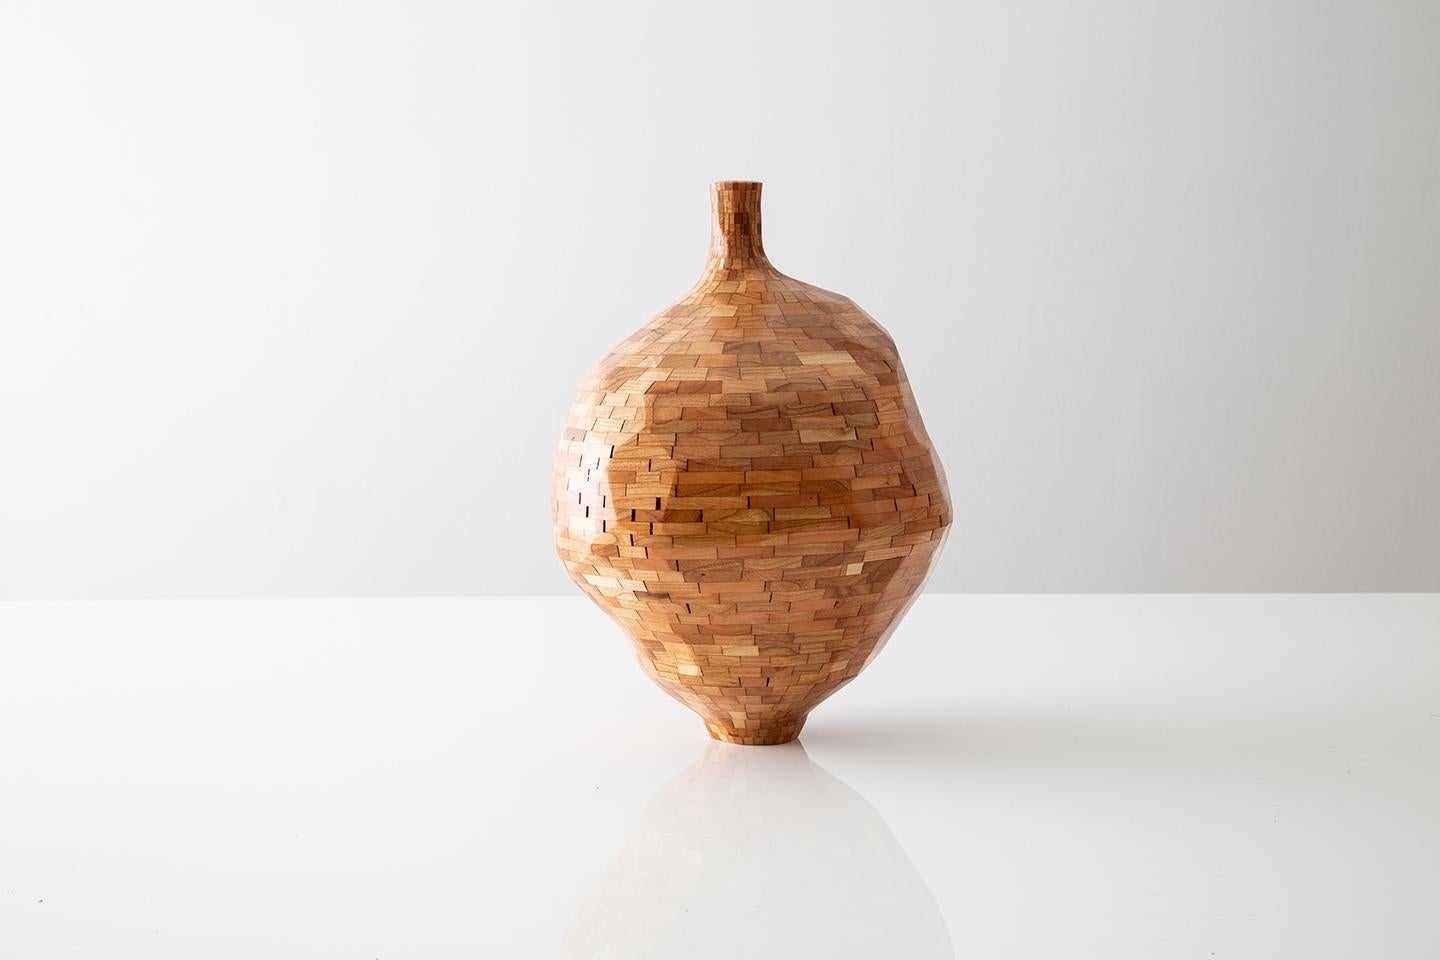 Part of Richard Haining's STACKED Collection, this vase was made using reclaimed cherry sourced and salvaged from a variety of local Brooklyn wood shops. The wood's natural coloring shows off warm tones ranging dark oranges to light browns and reds,